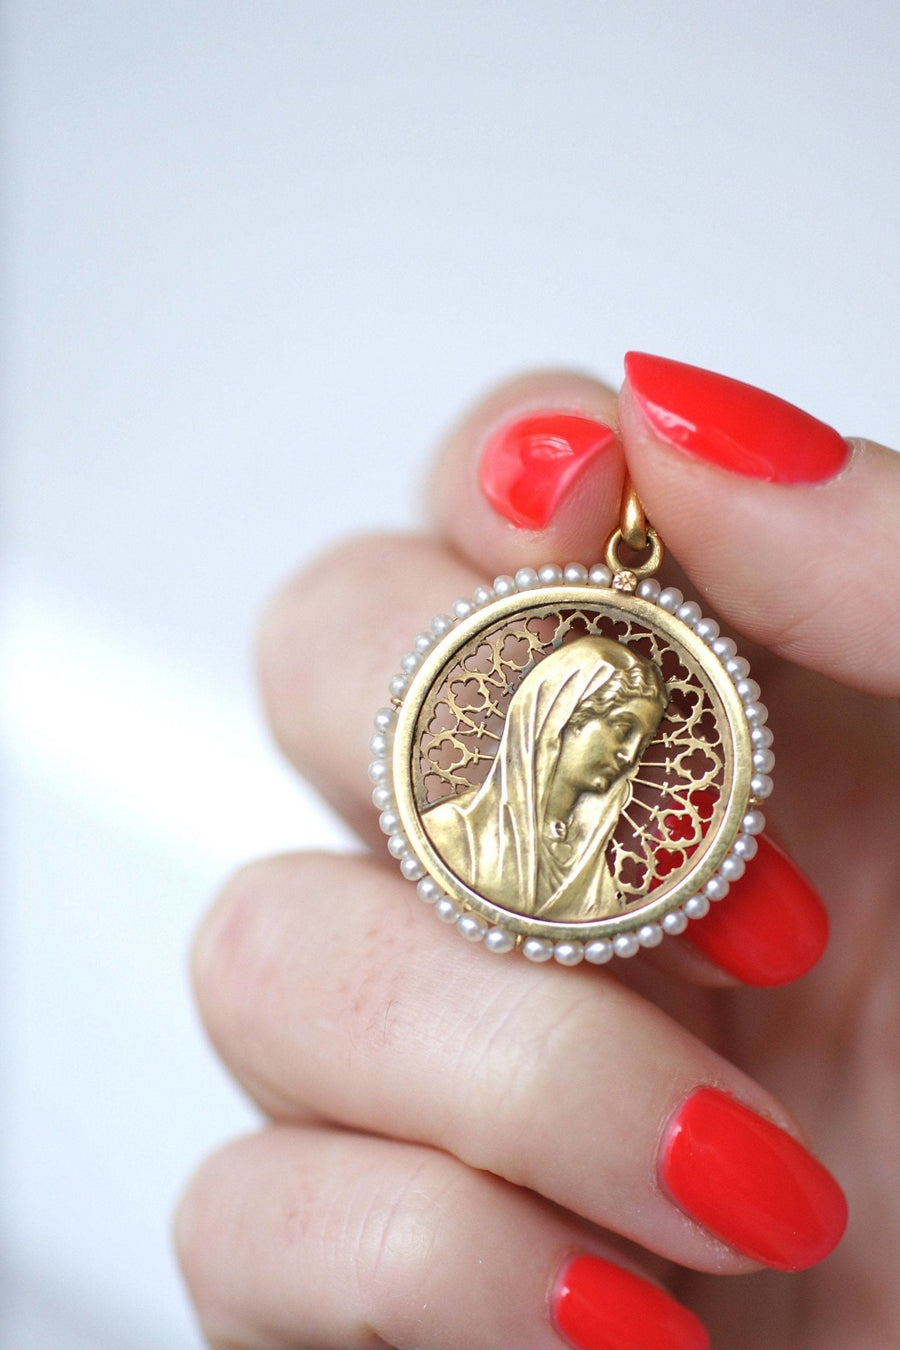 Antique Virgin Mary medal in gold and pearls - Penelope Gallery